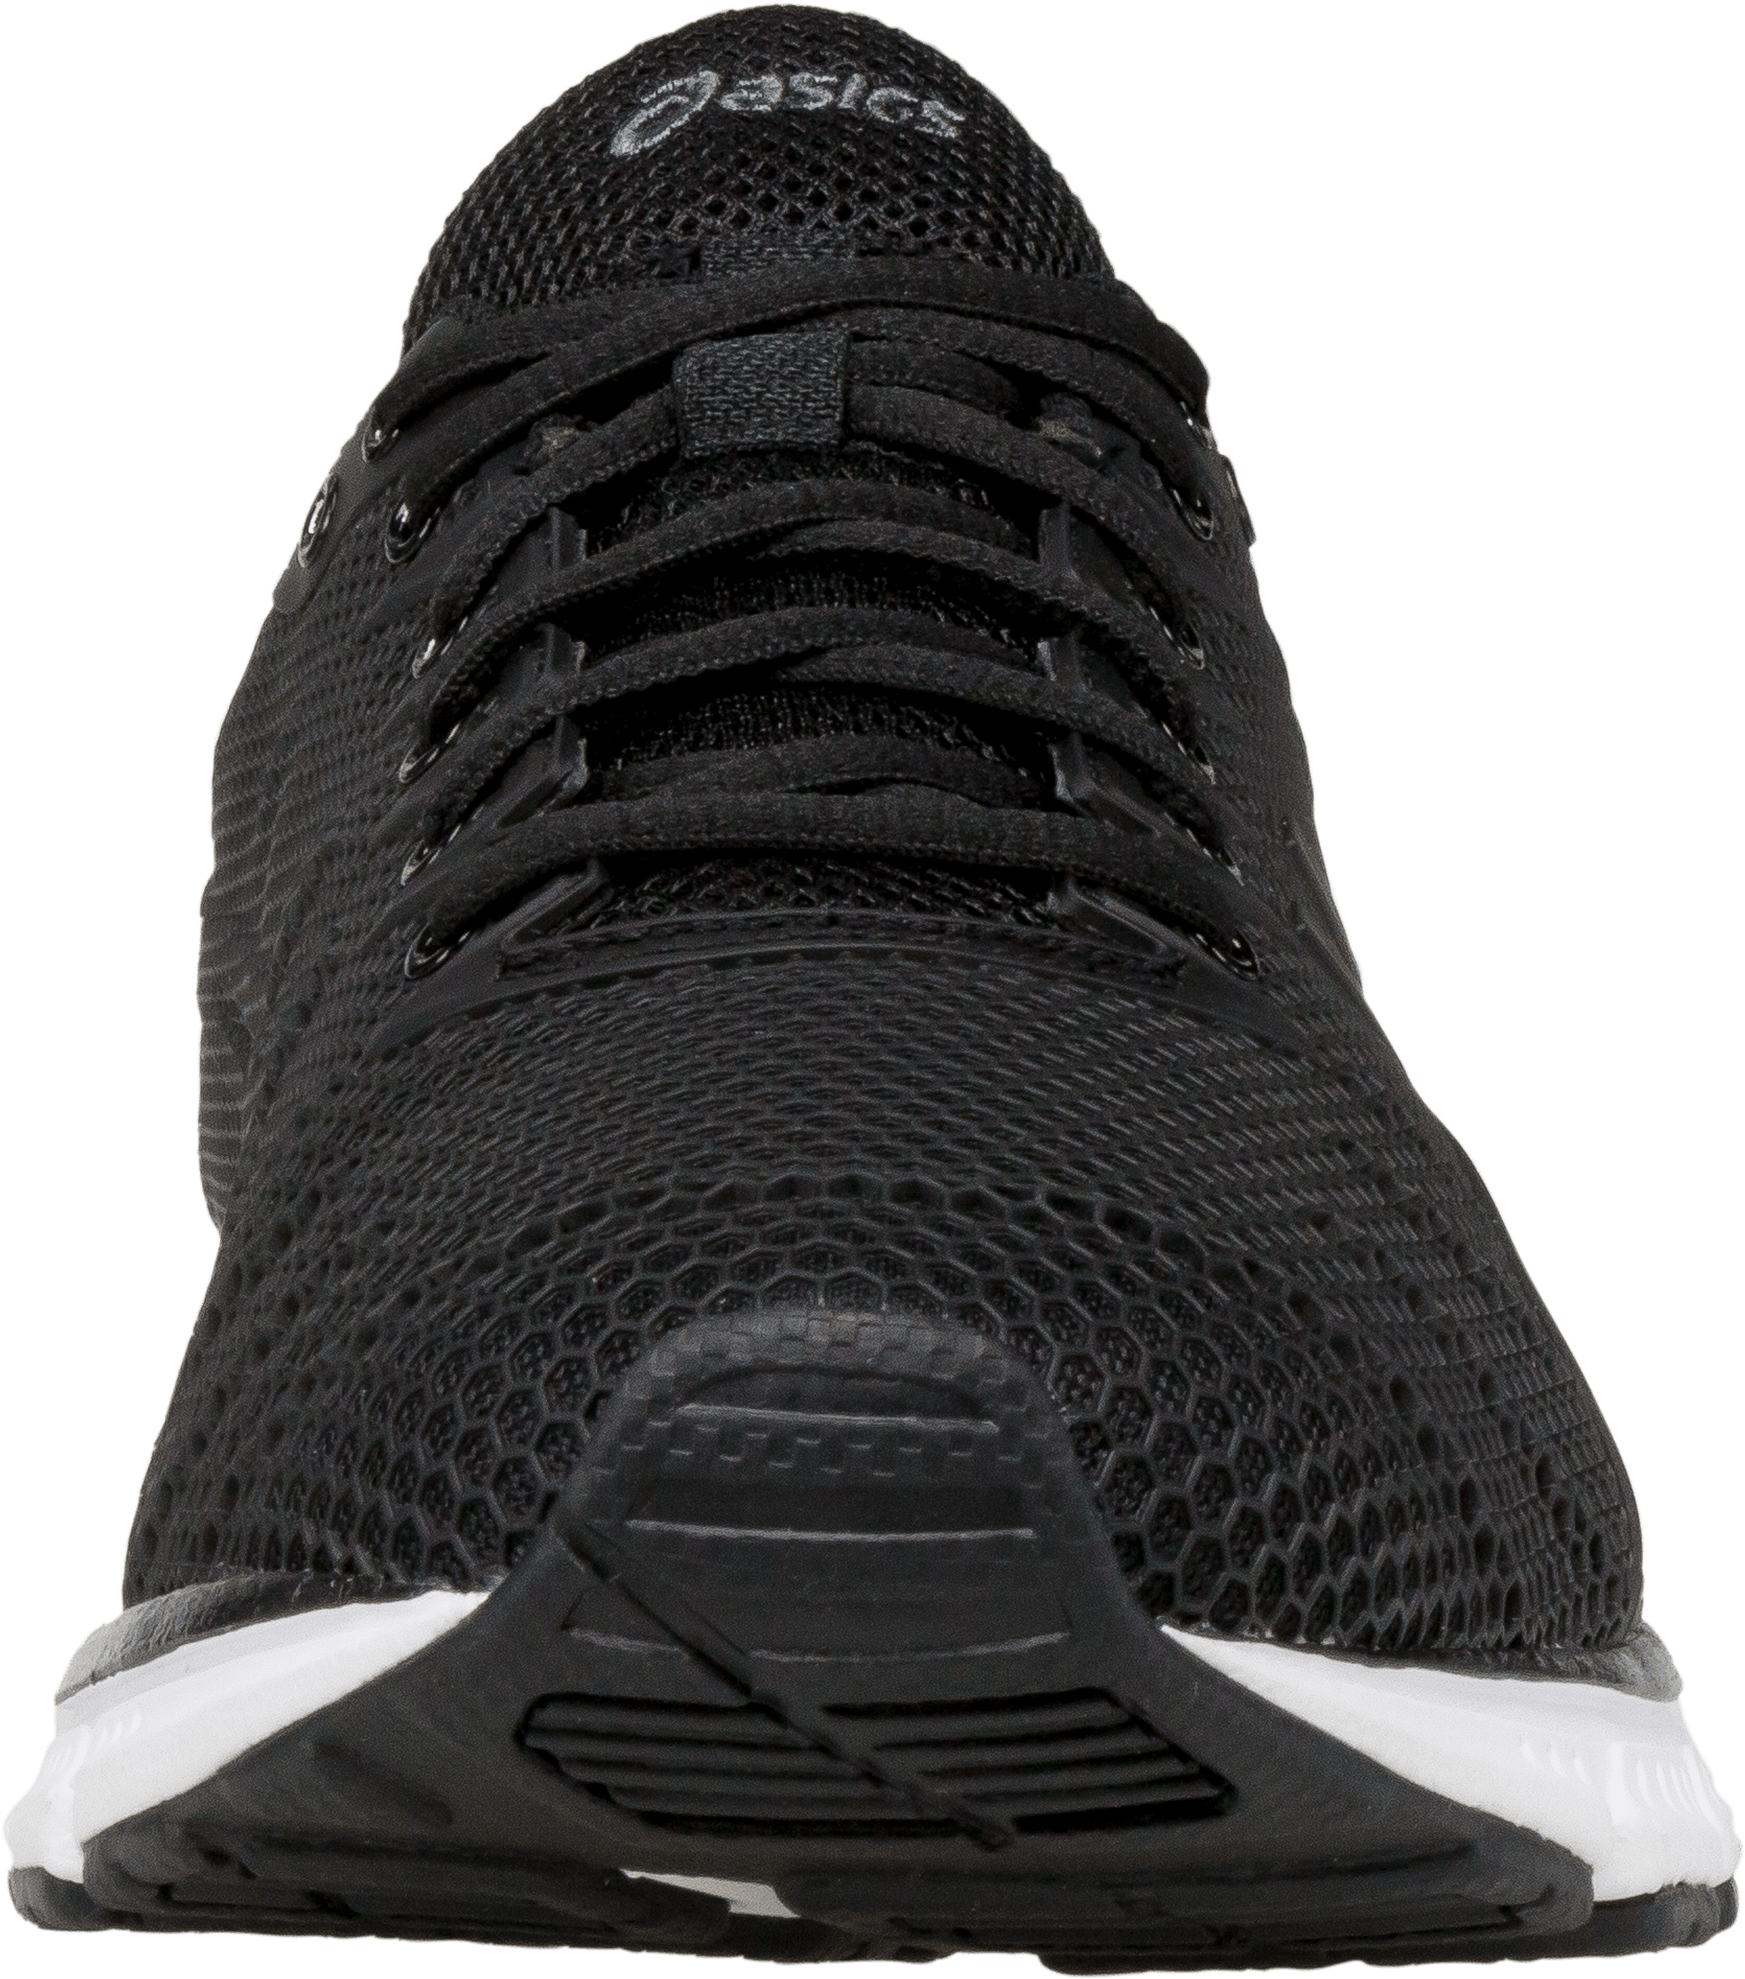 Black Running Shoe Front View